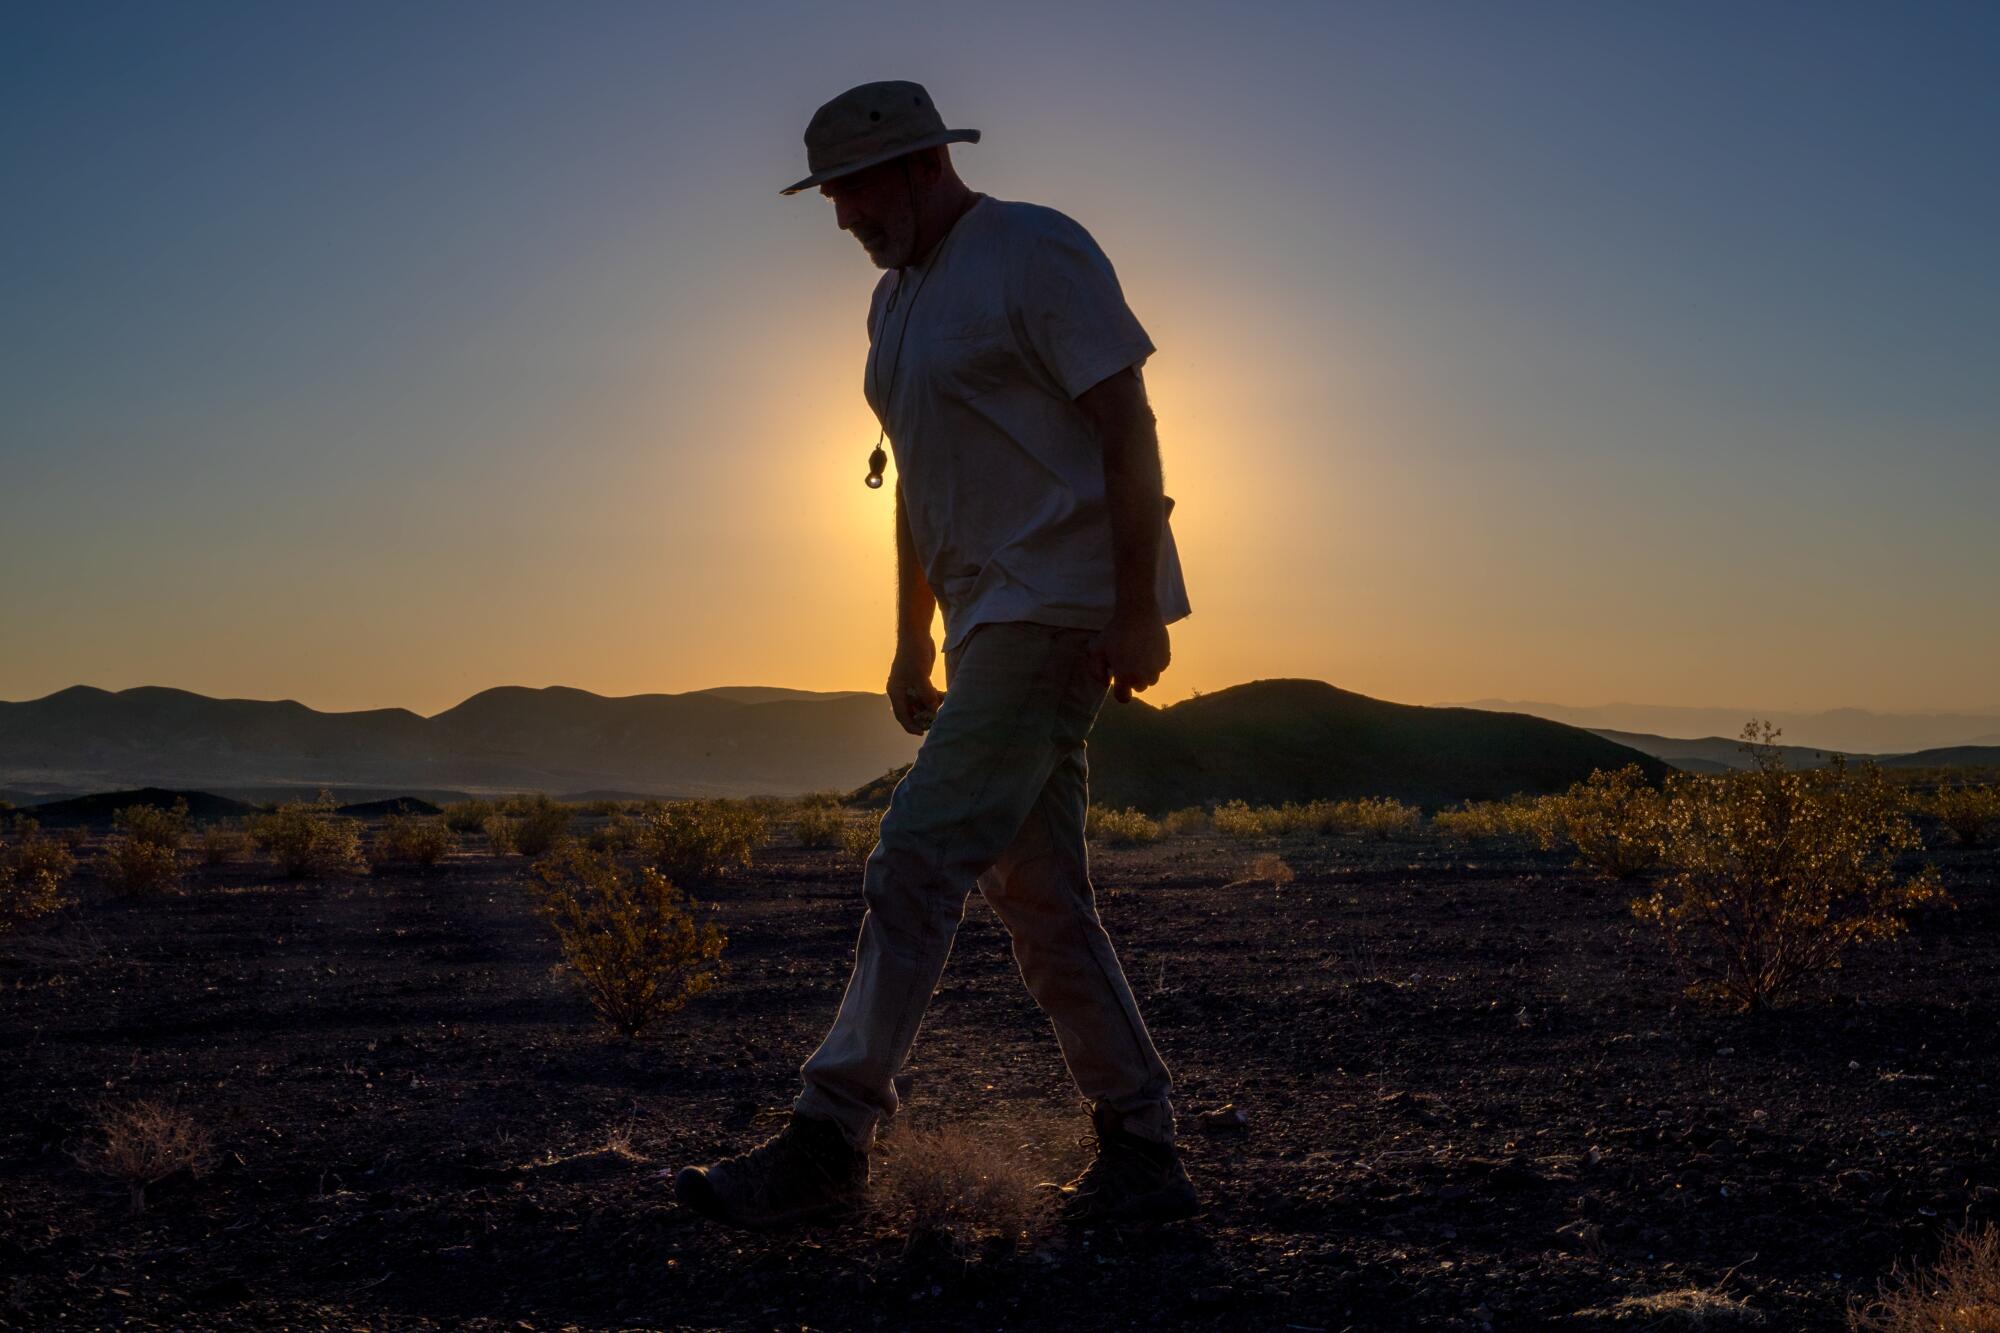 A man's figure is silhouetted by the rising sun as he strides through the desert.